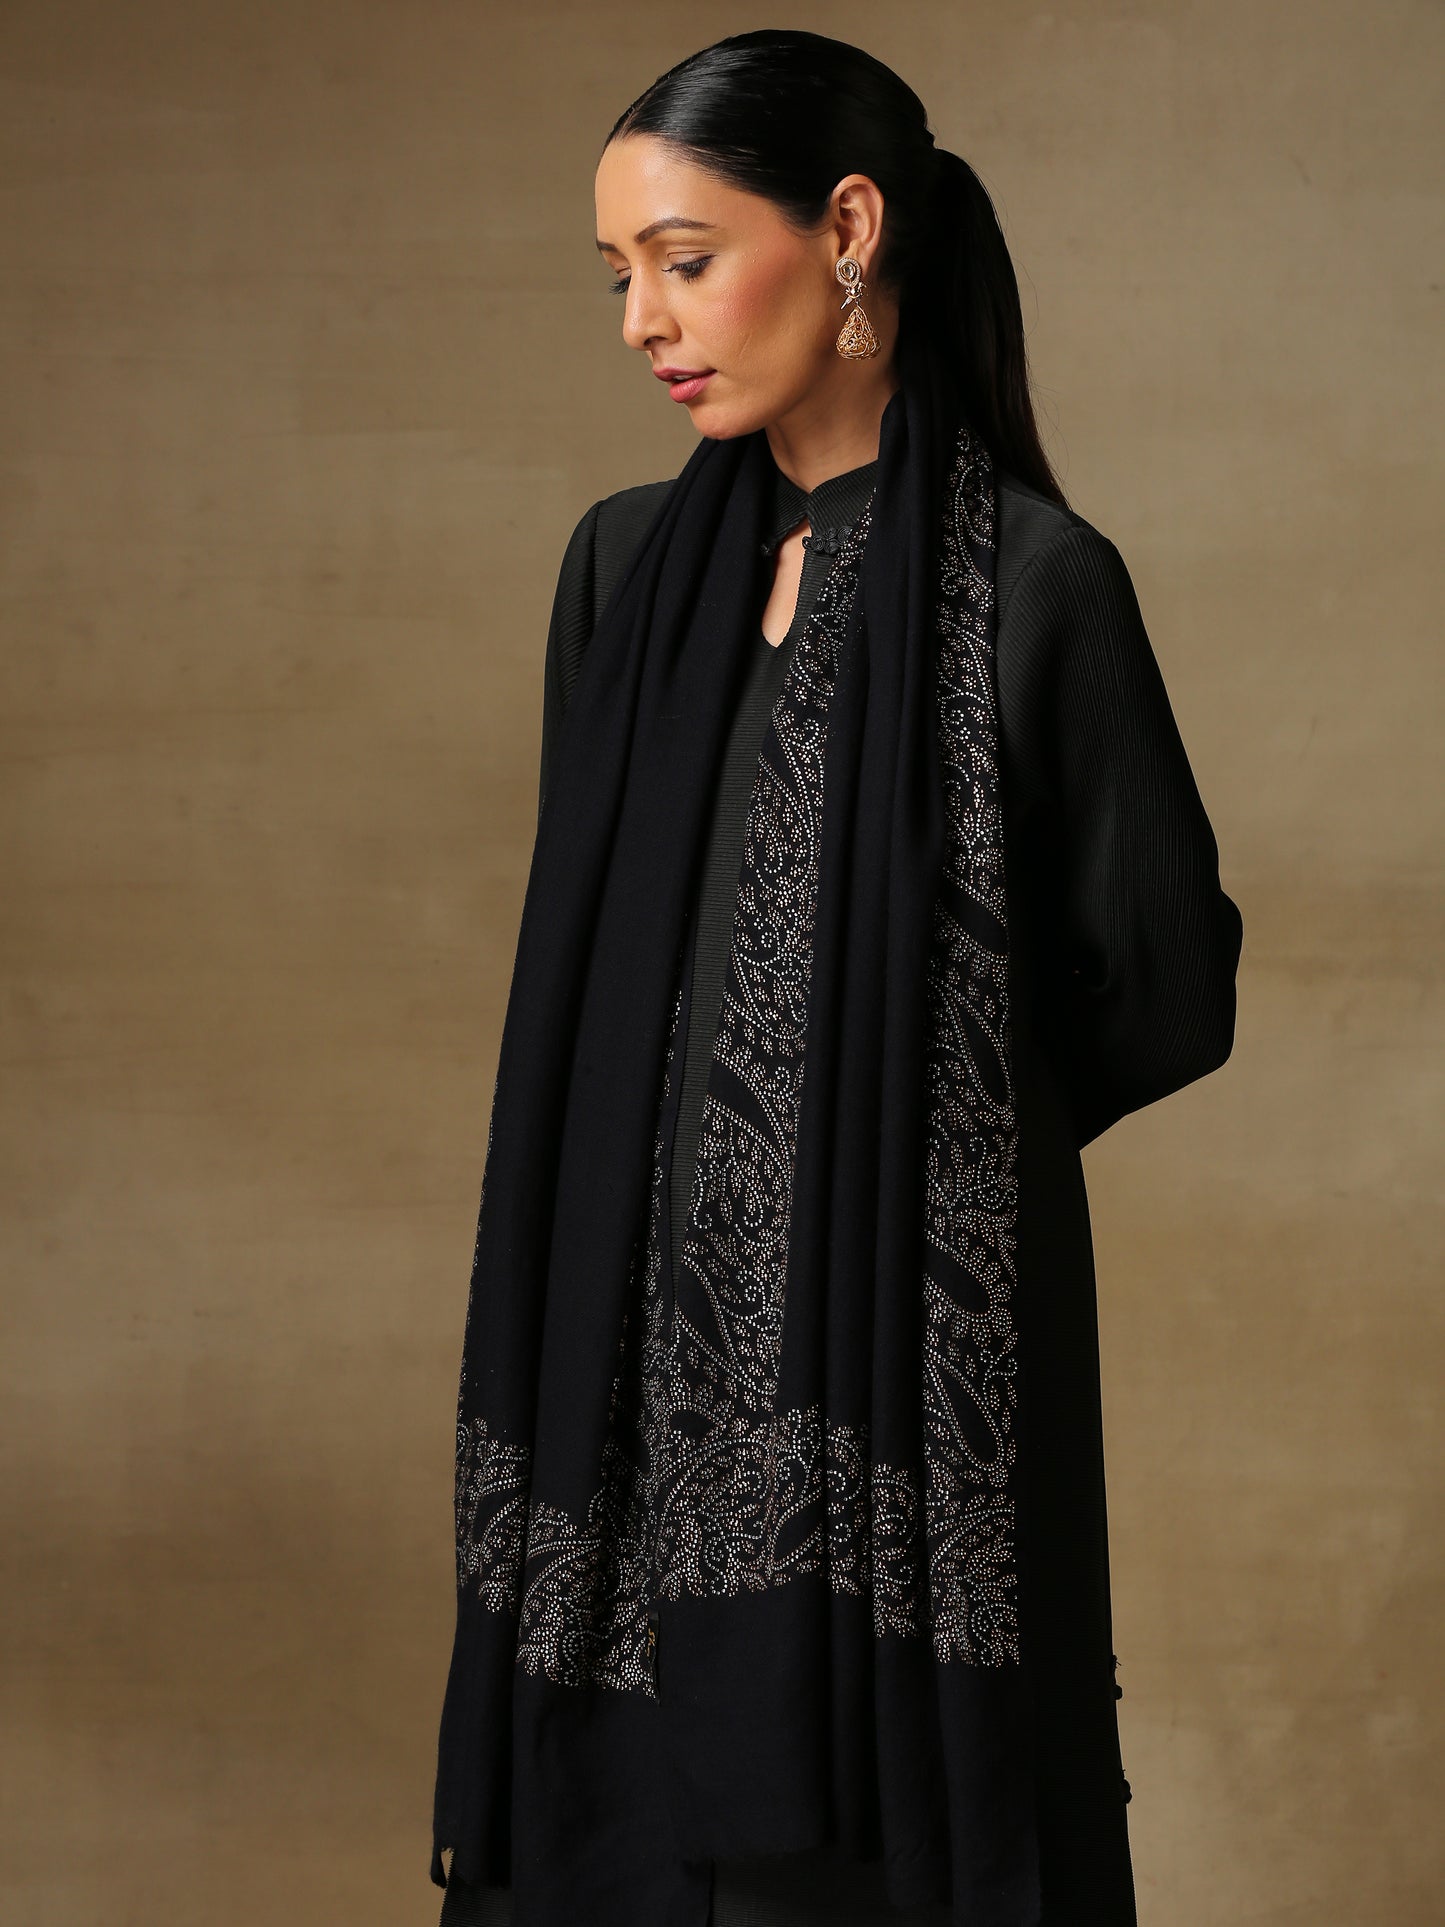 Model is wearing black stole from the Era of Zaywar Border Swarovski Stole collection, hand embellished with fine swarovski in paisley design , along the border.